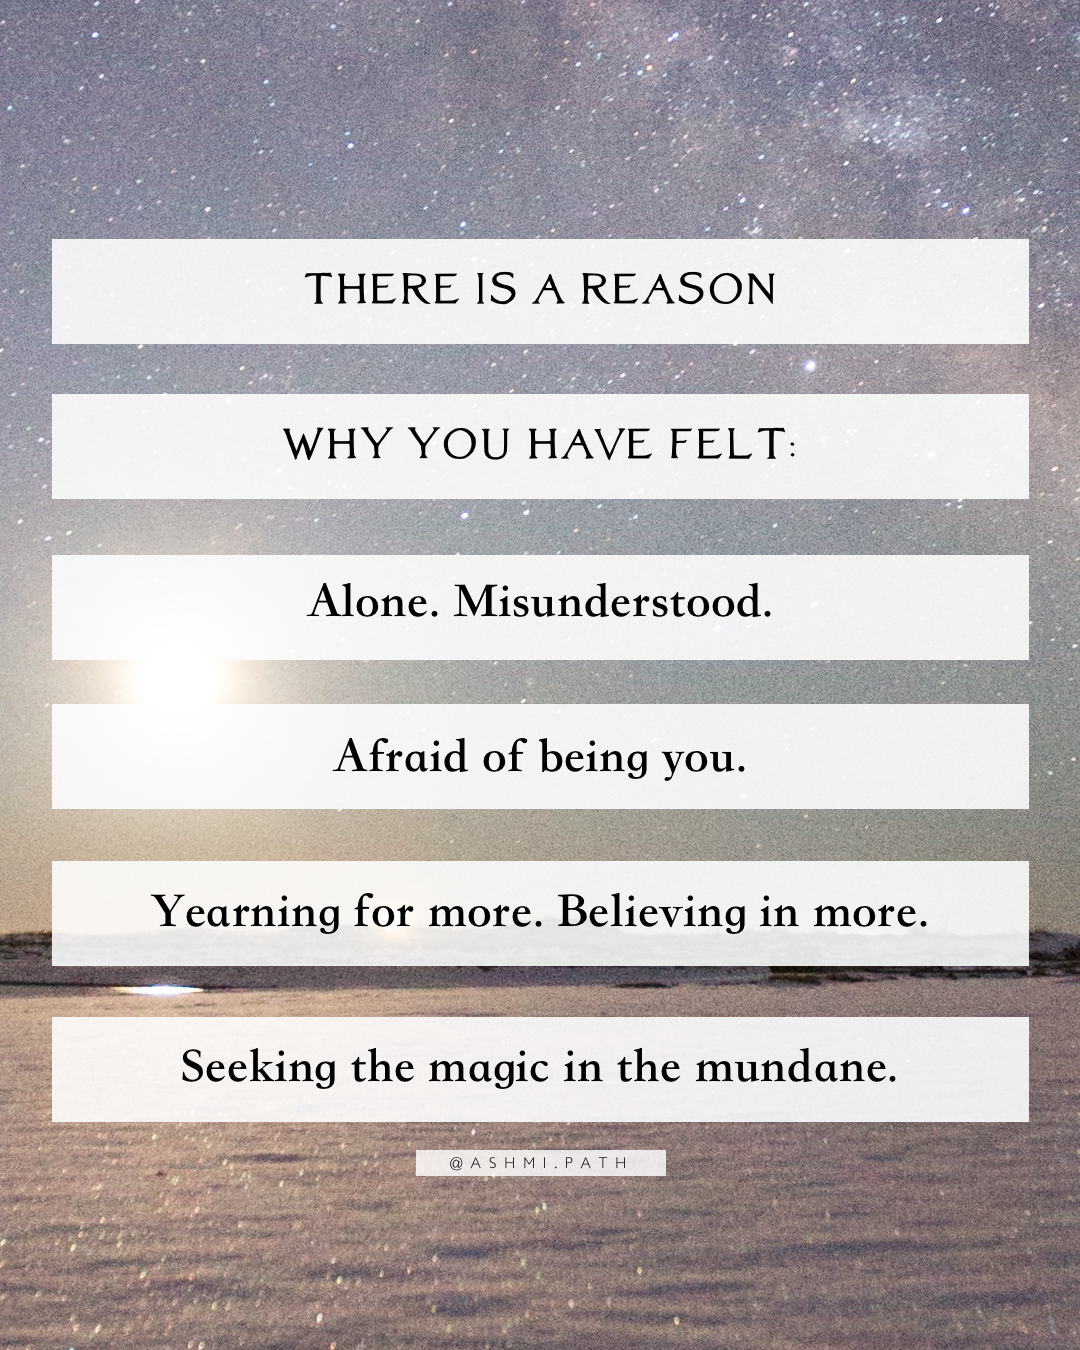 You are Here for a Reason, Beyond the Ordinary